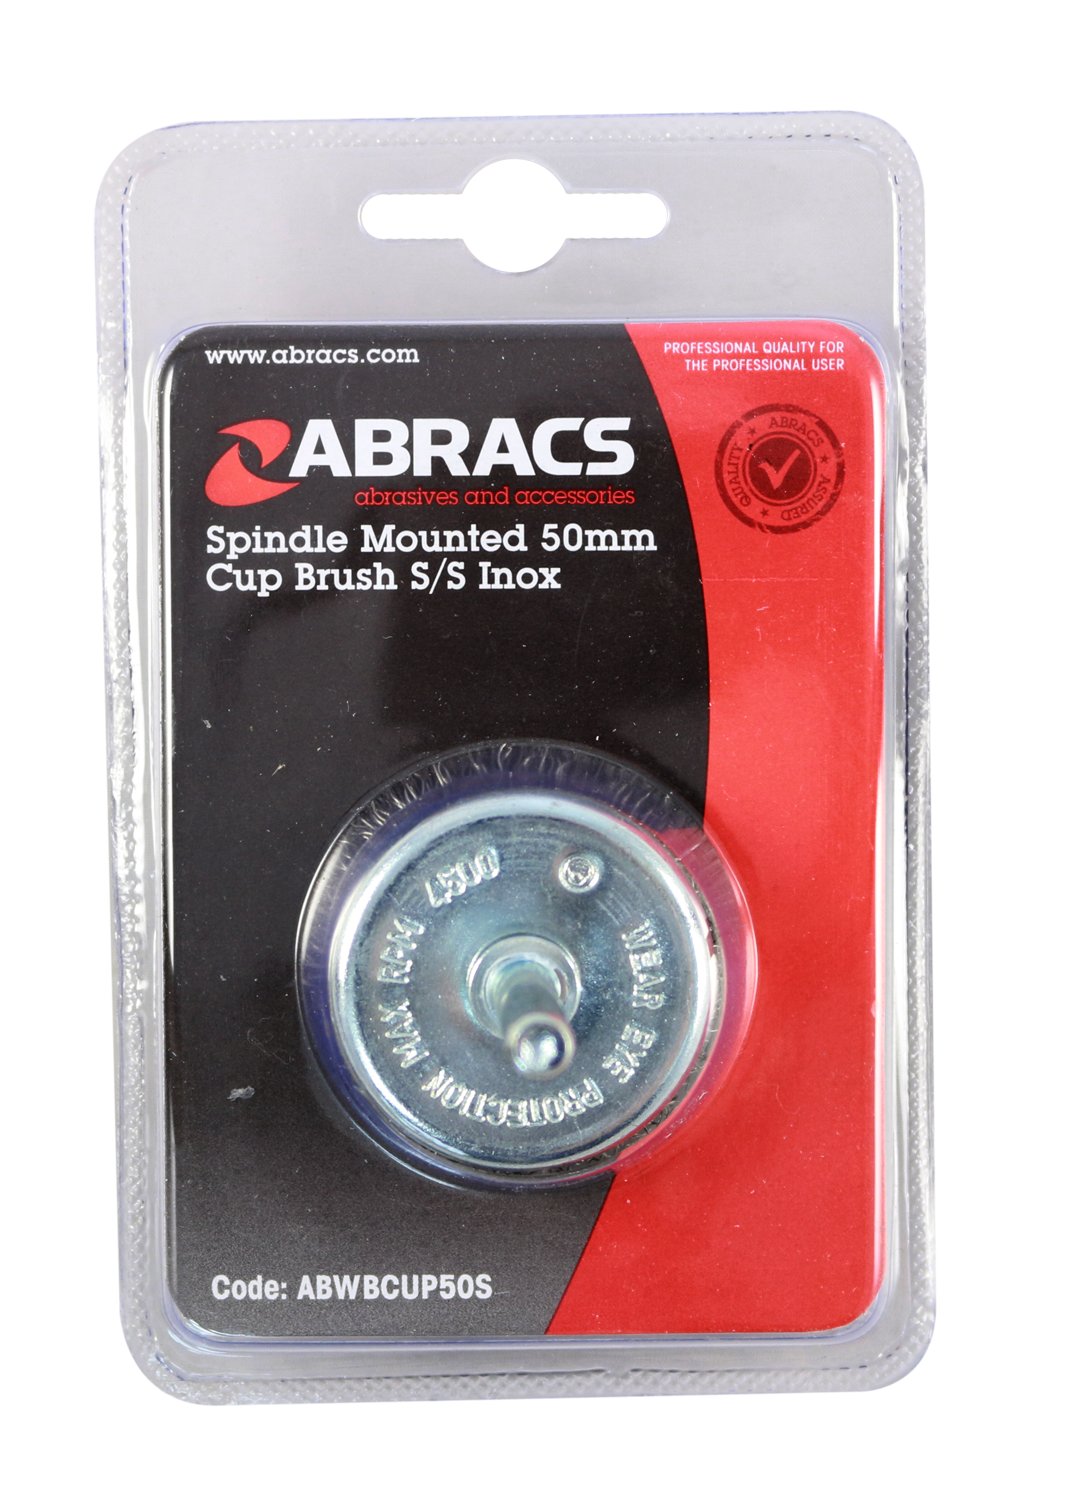 Abracs  SPINDLE MOUNTED 50mm CUP BRUSH S/S 